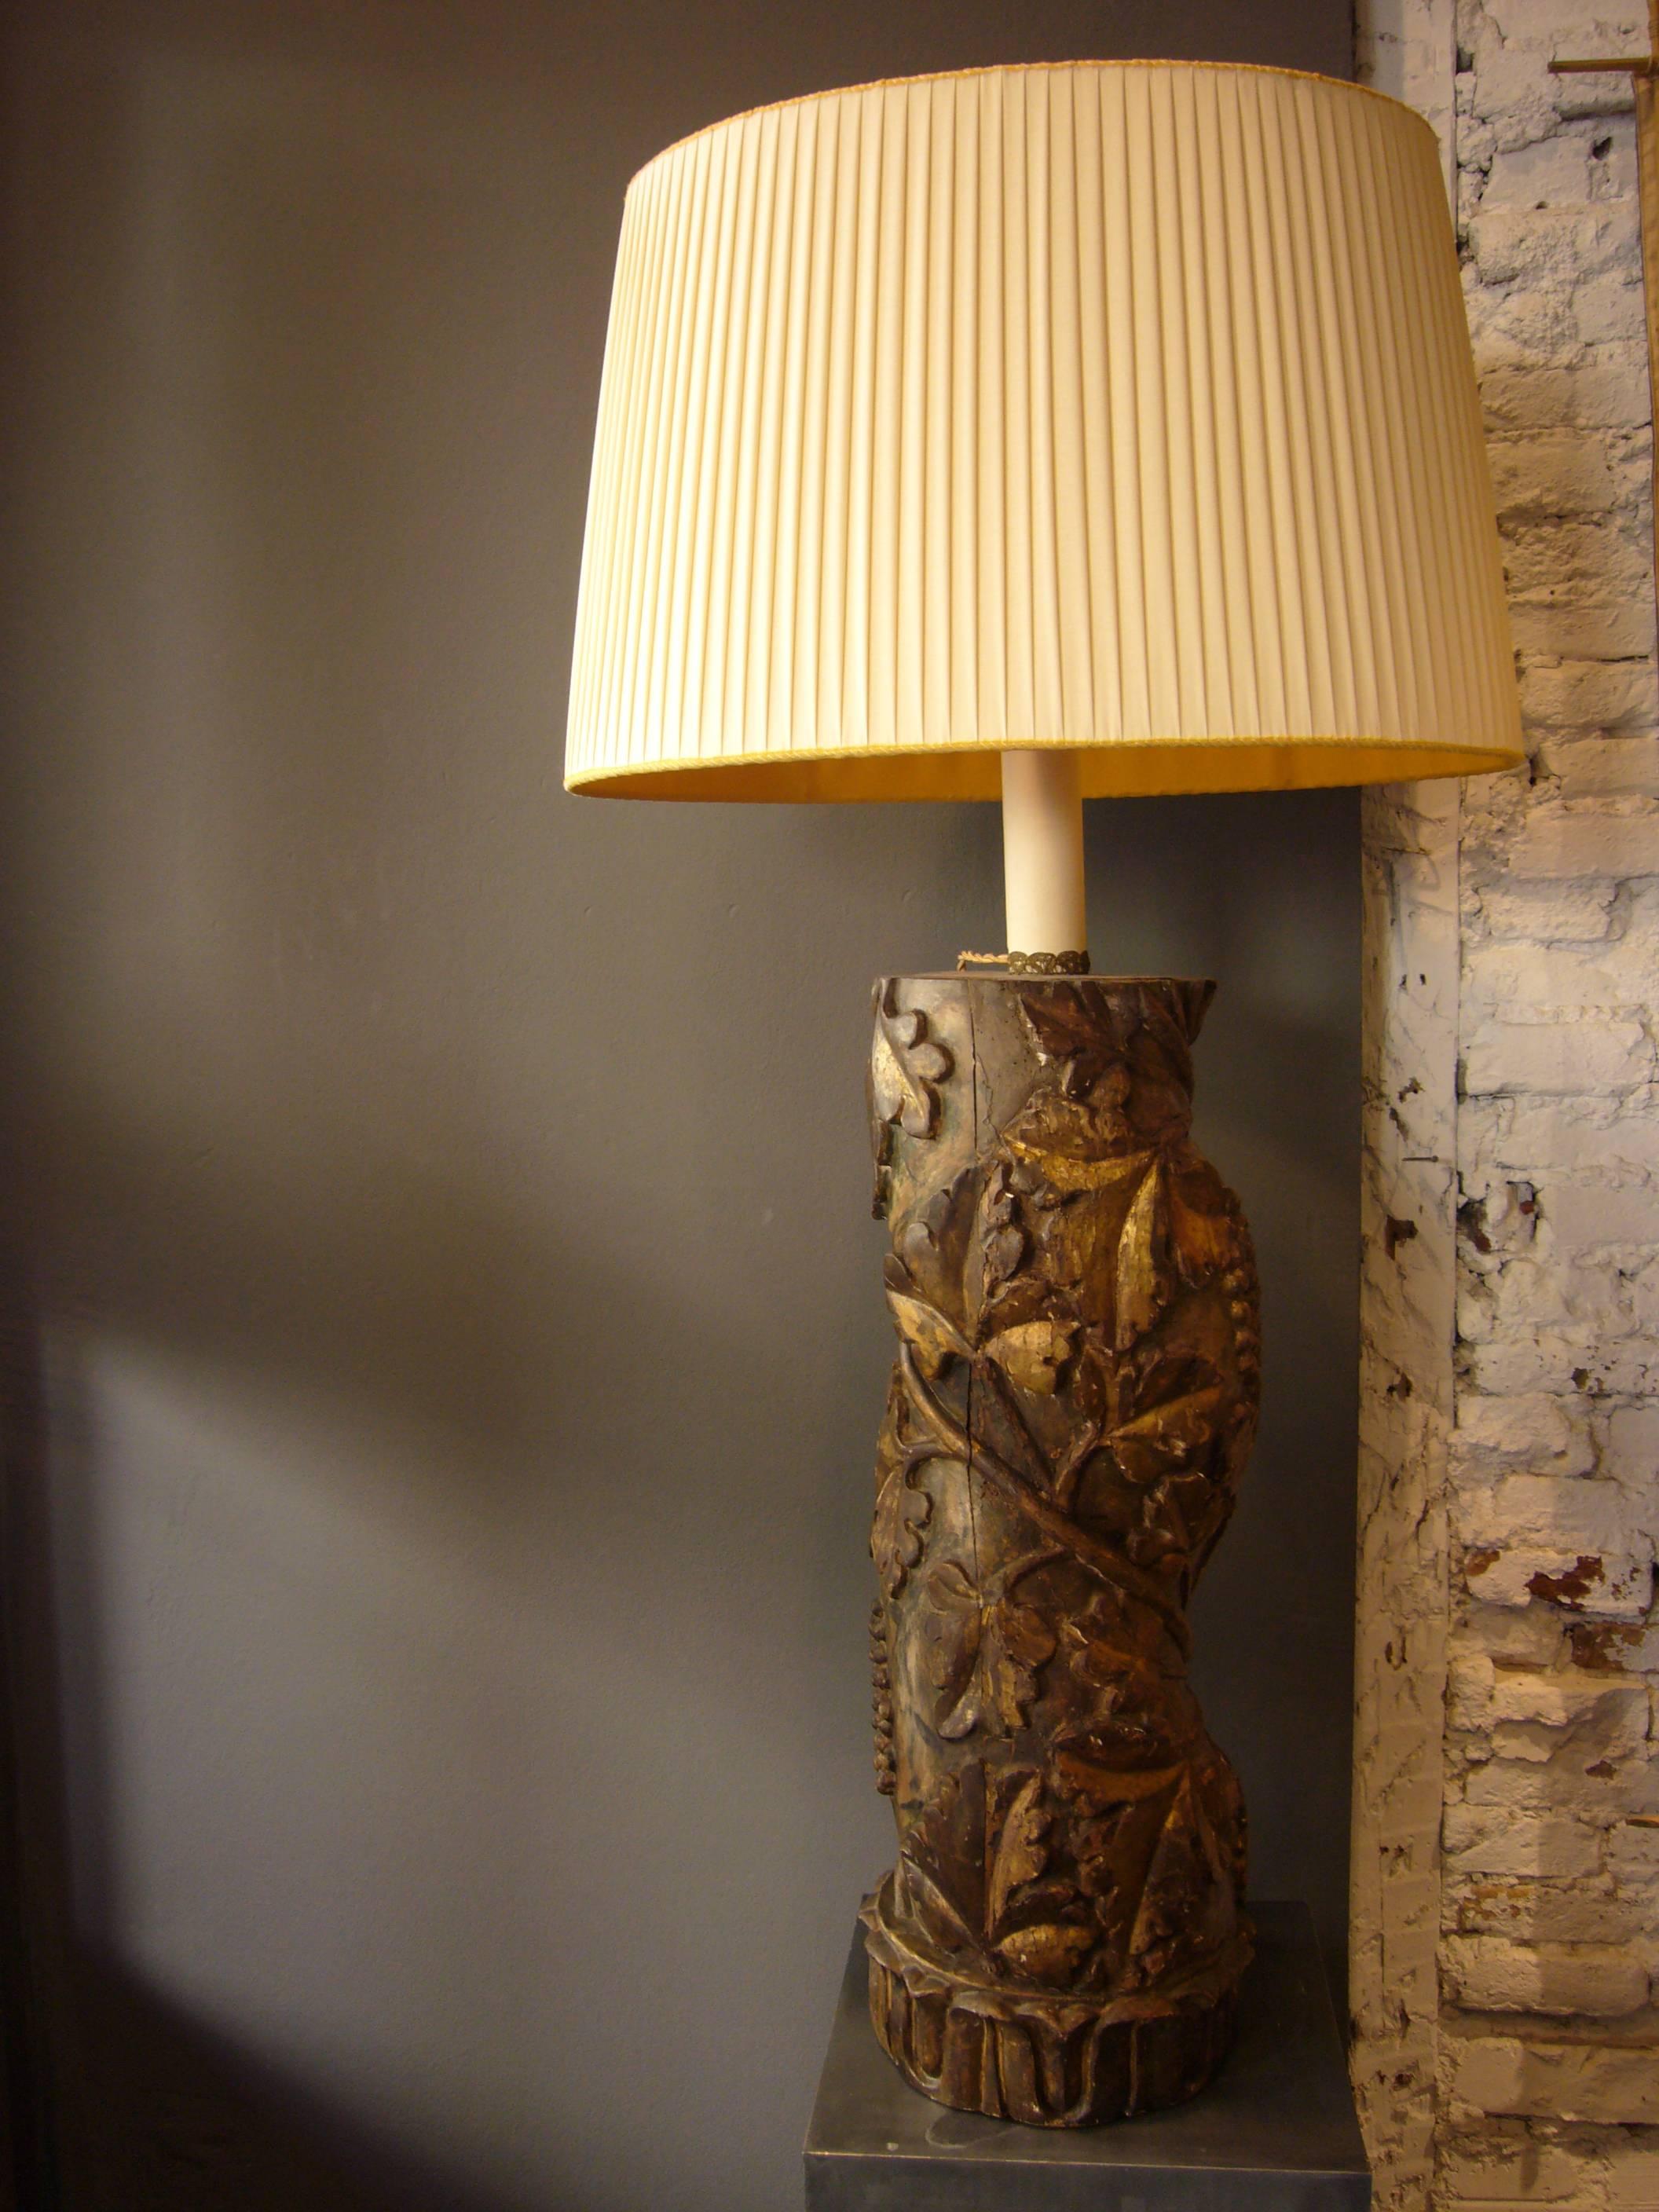 Very elegant table lamp from a carved column
Golden wood (not homogeneous)
Grape branch embossed
Late 19th century
The lampshade is oval; its fabric - pleated - is outside cream colour and inside gold.
The lampshade is new and it is hand made